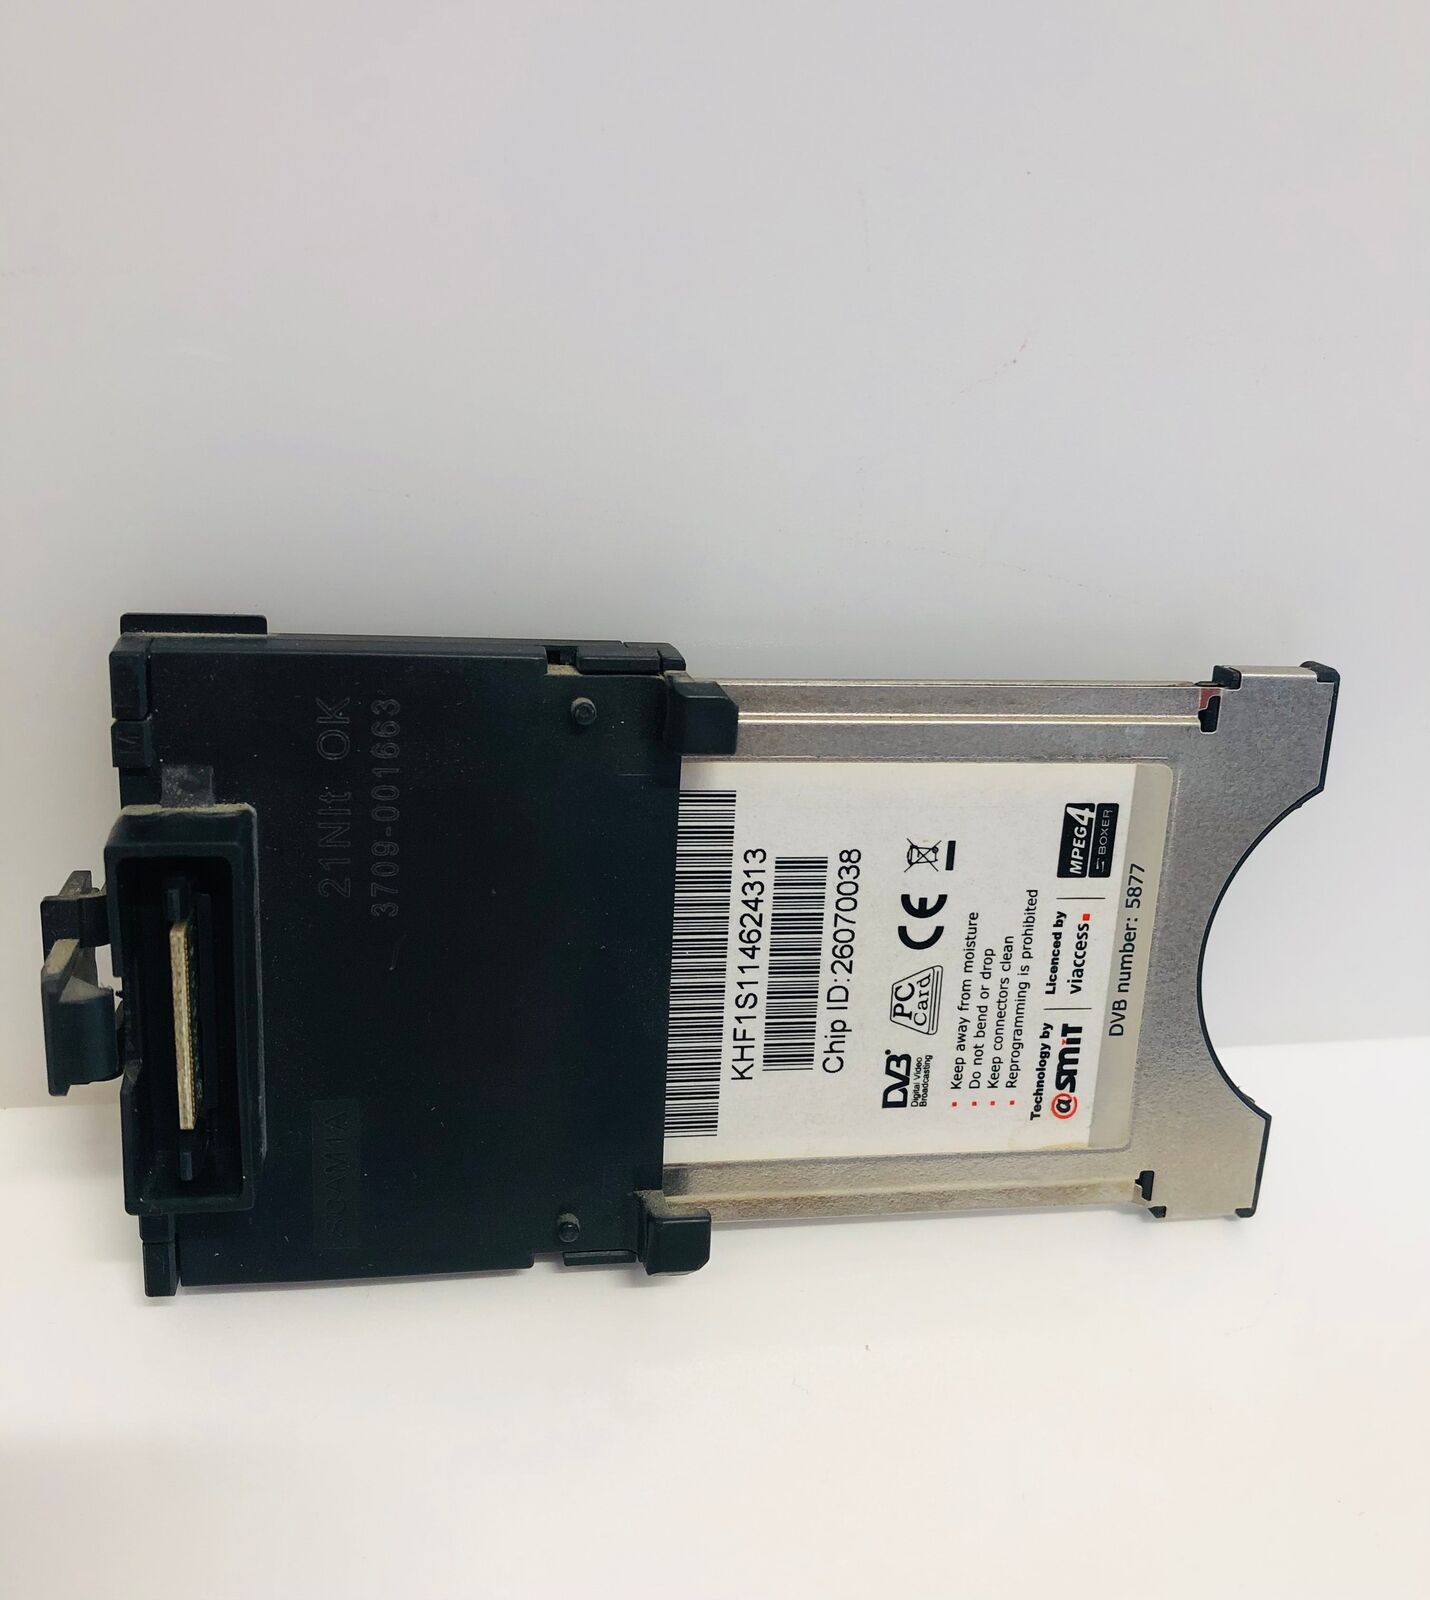 COMMON INTERFACE CARD 3709-001663